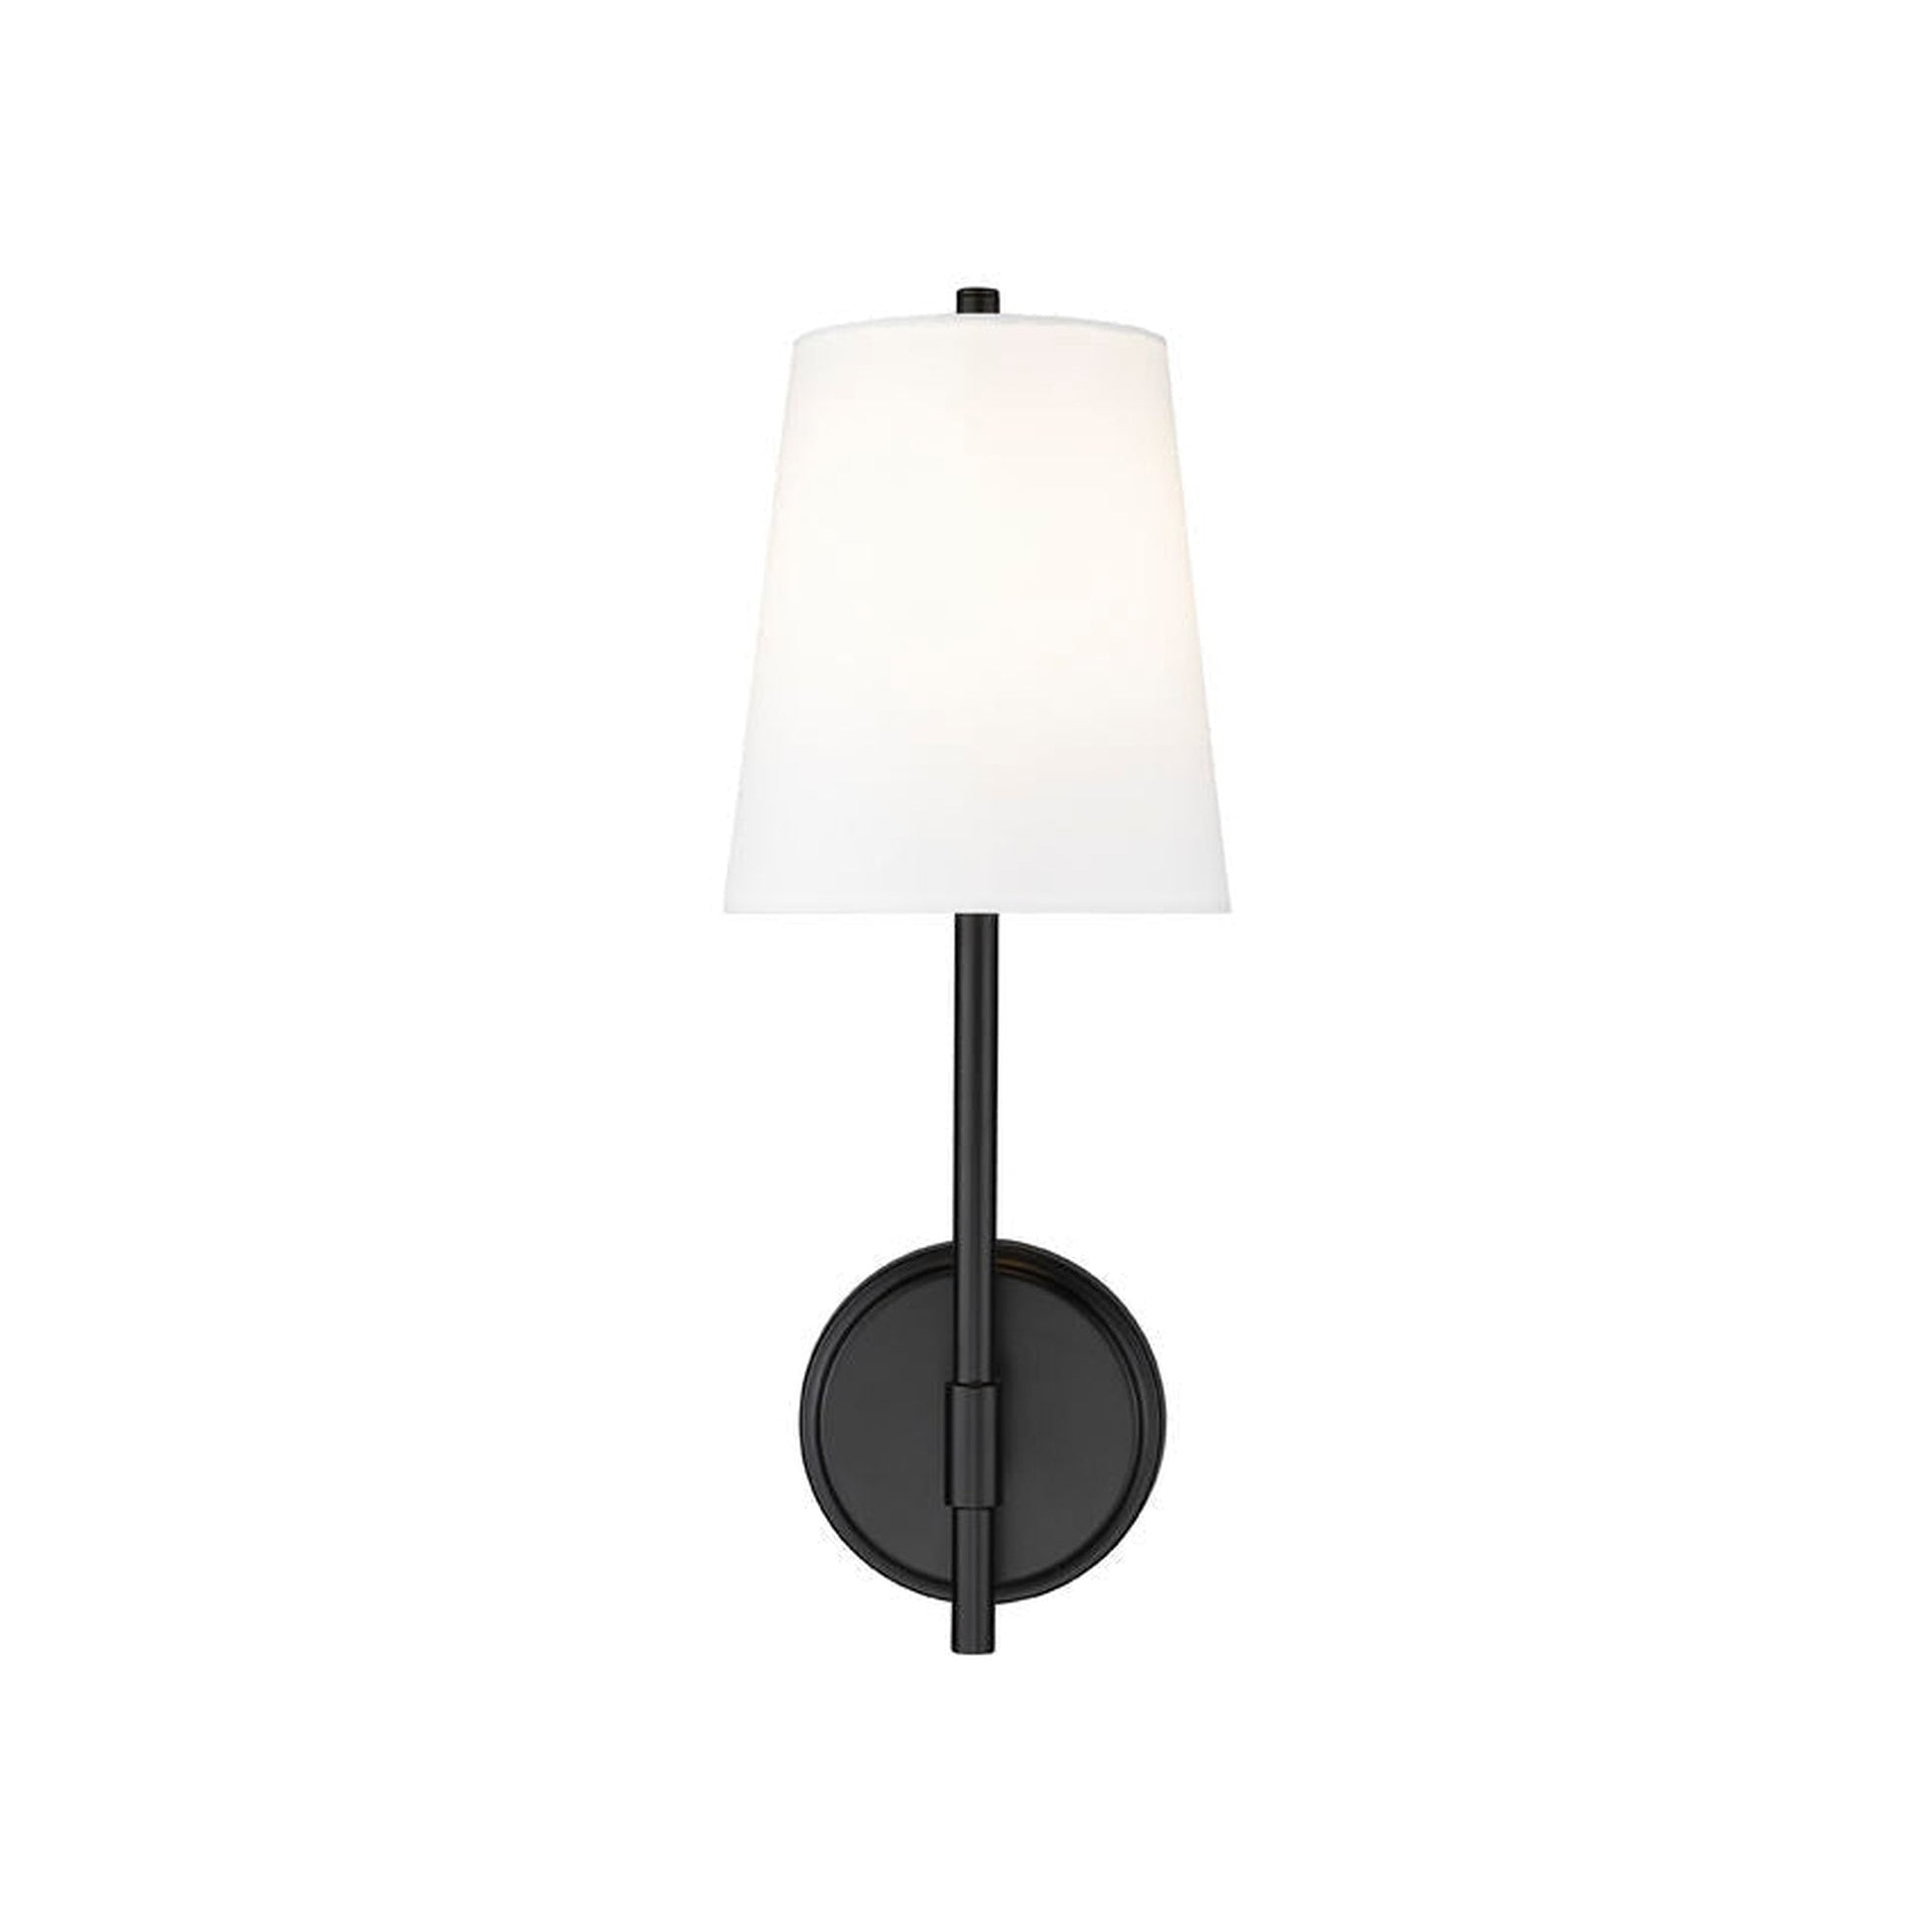 Z-Lite Winward 6" 1-Light Matte Black Wall Sconce With White Fabric Shade